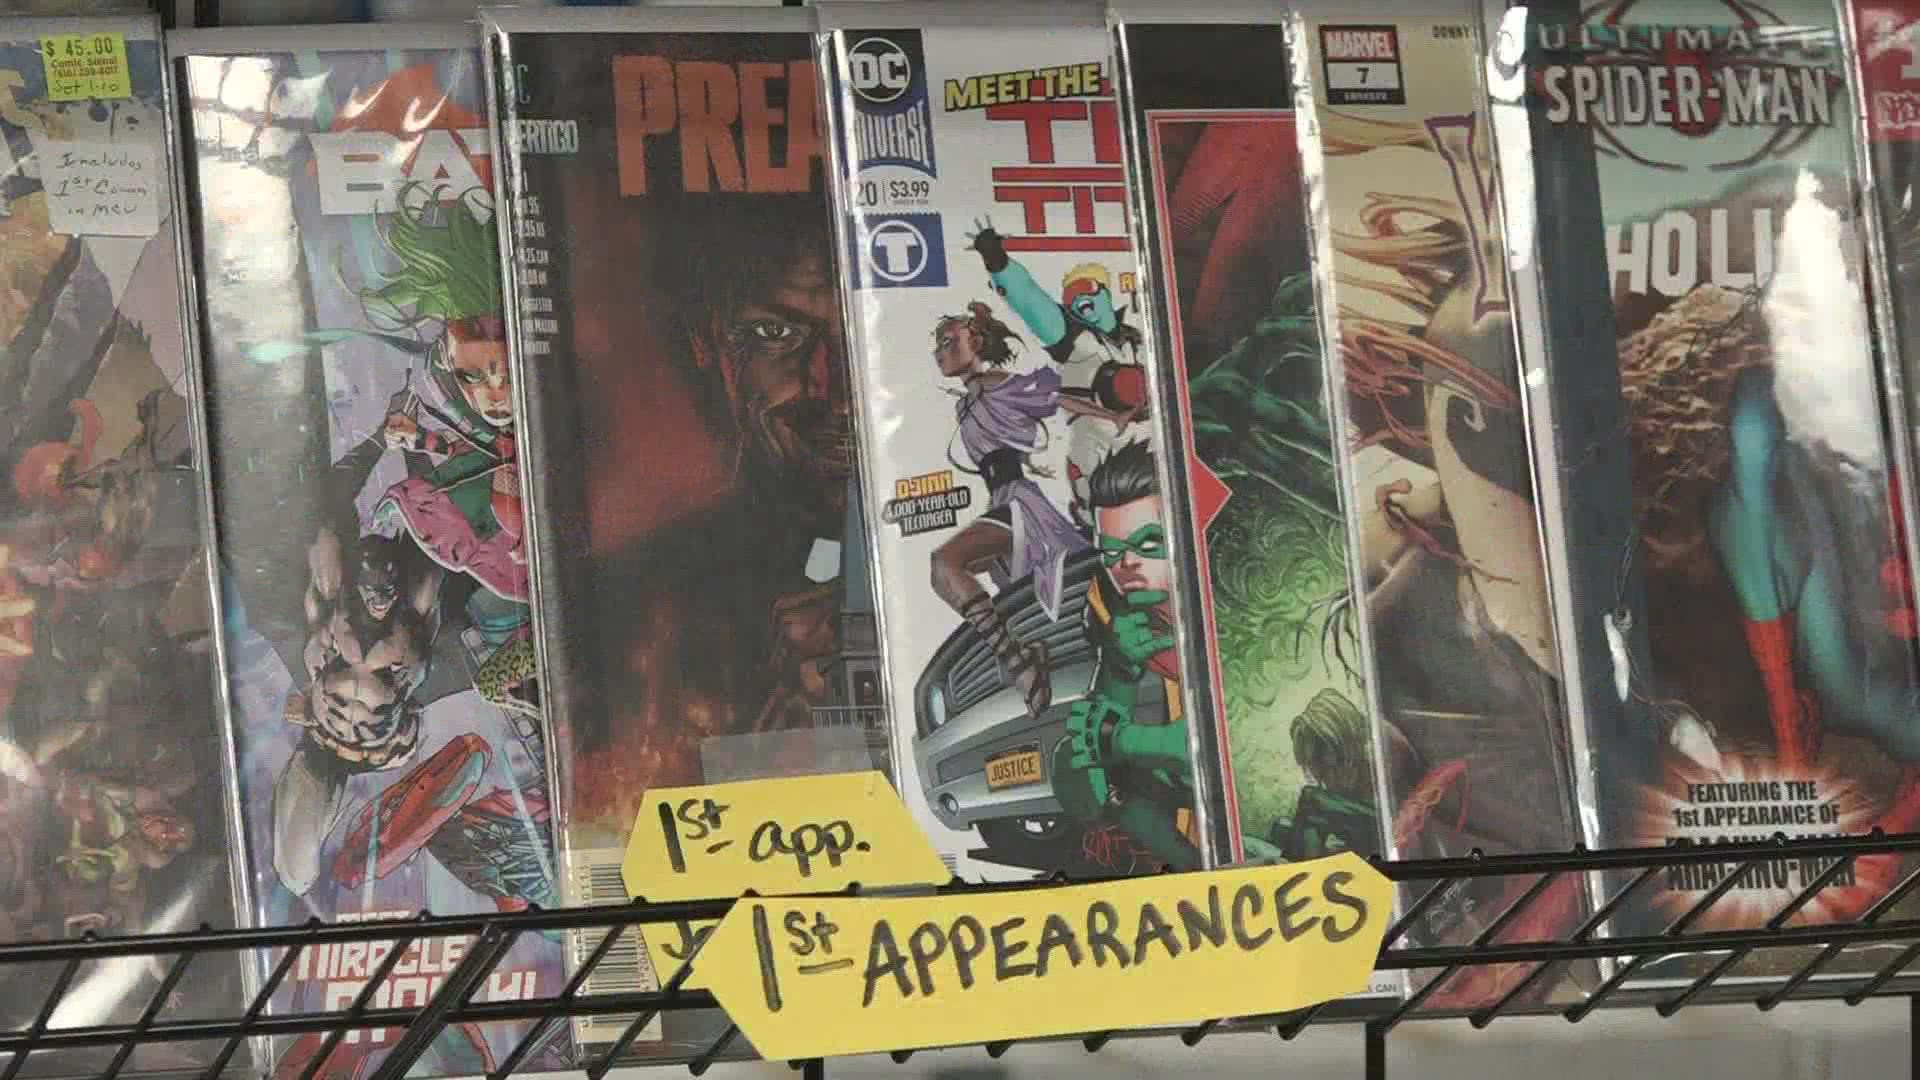 Libby reports record rise in demand for comic books from 2020 to